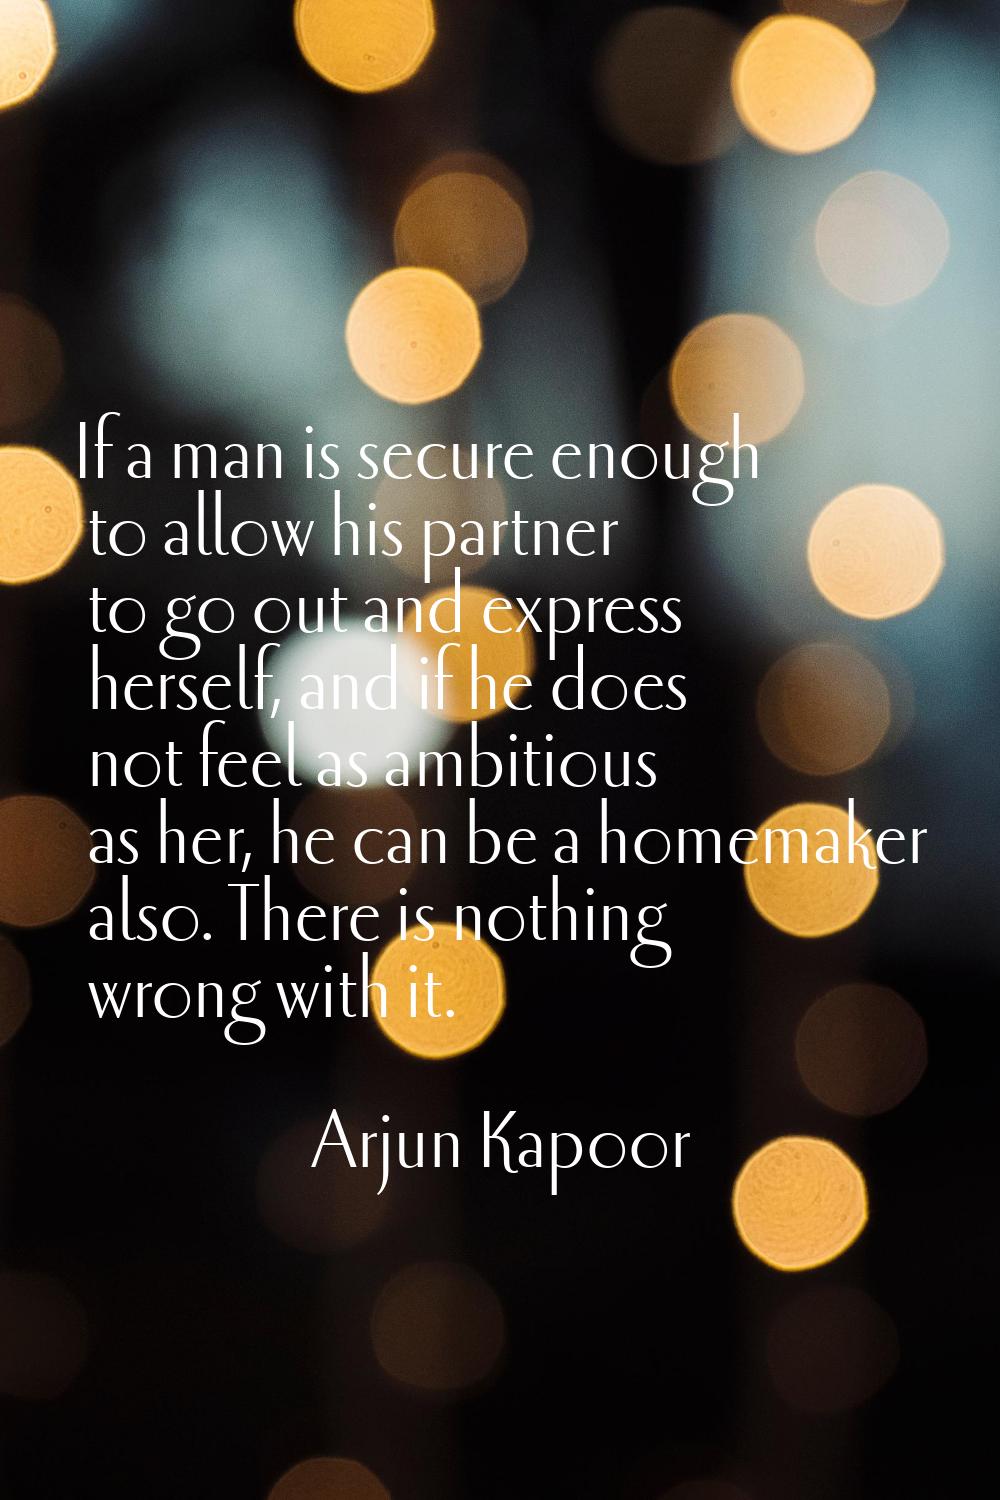 If a man is secure enough to allow his partner to go out and express herself, and if he does not fe